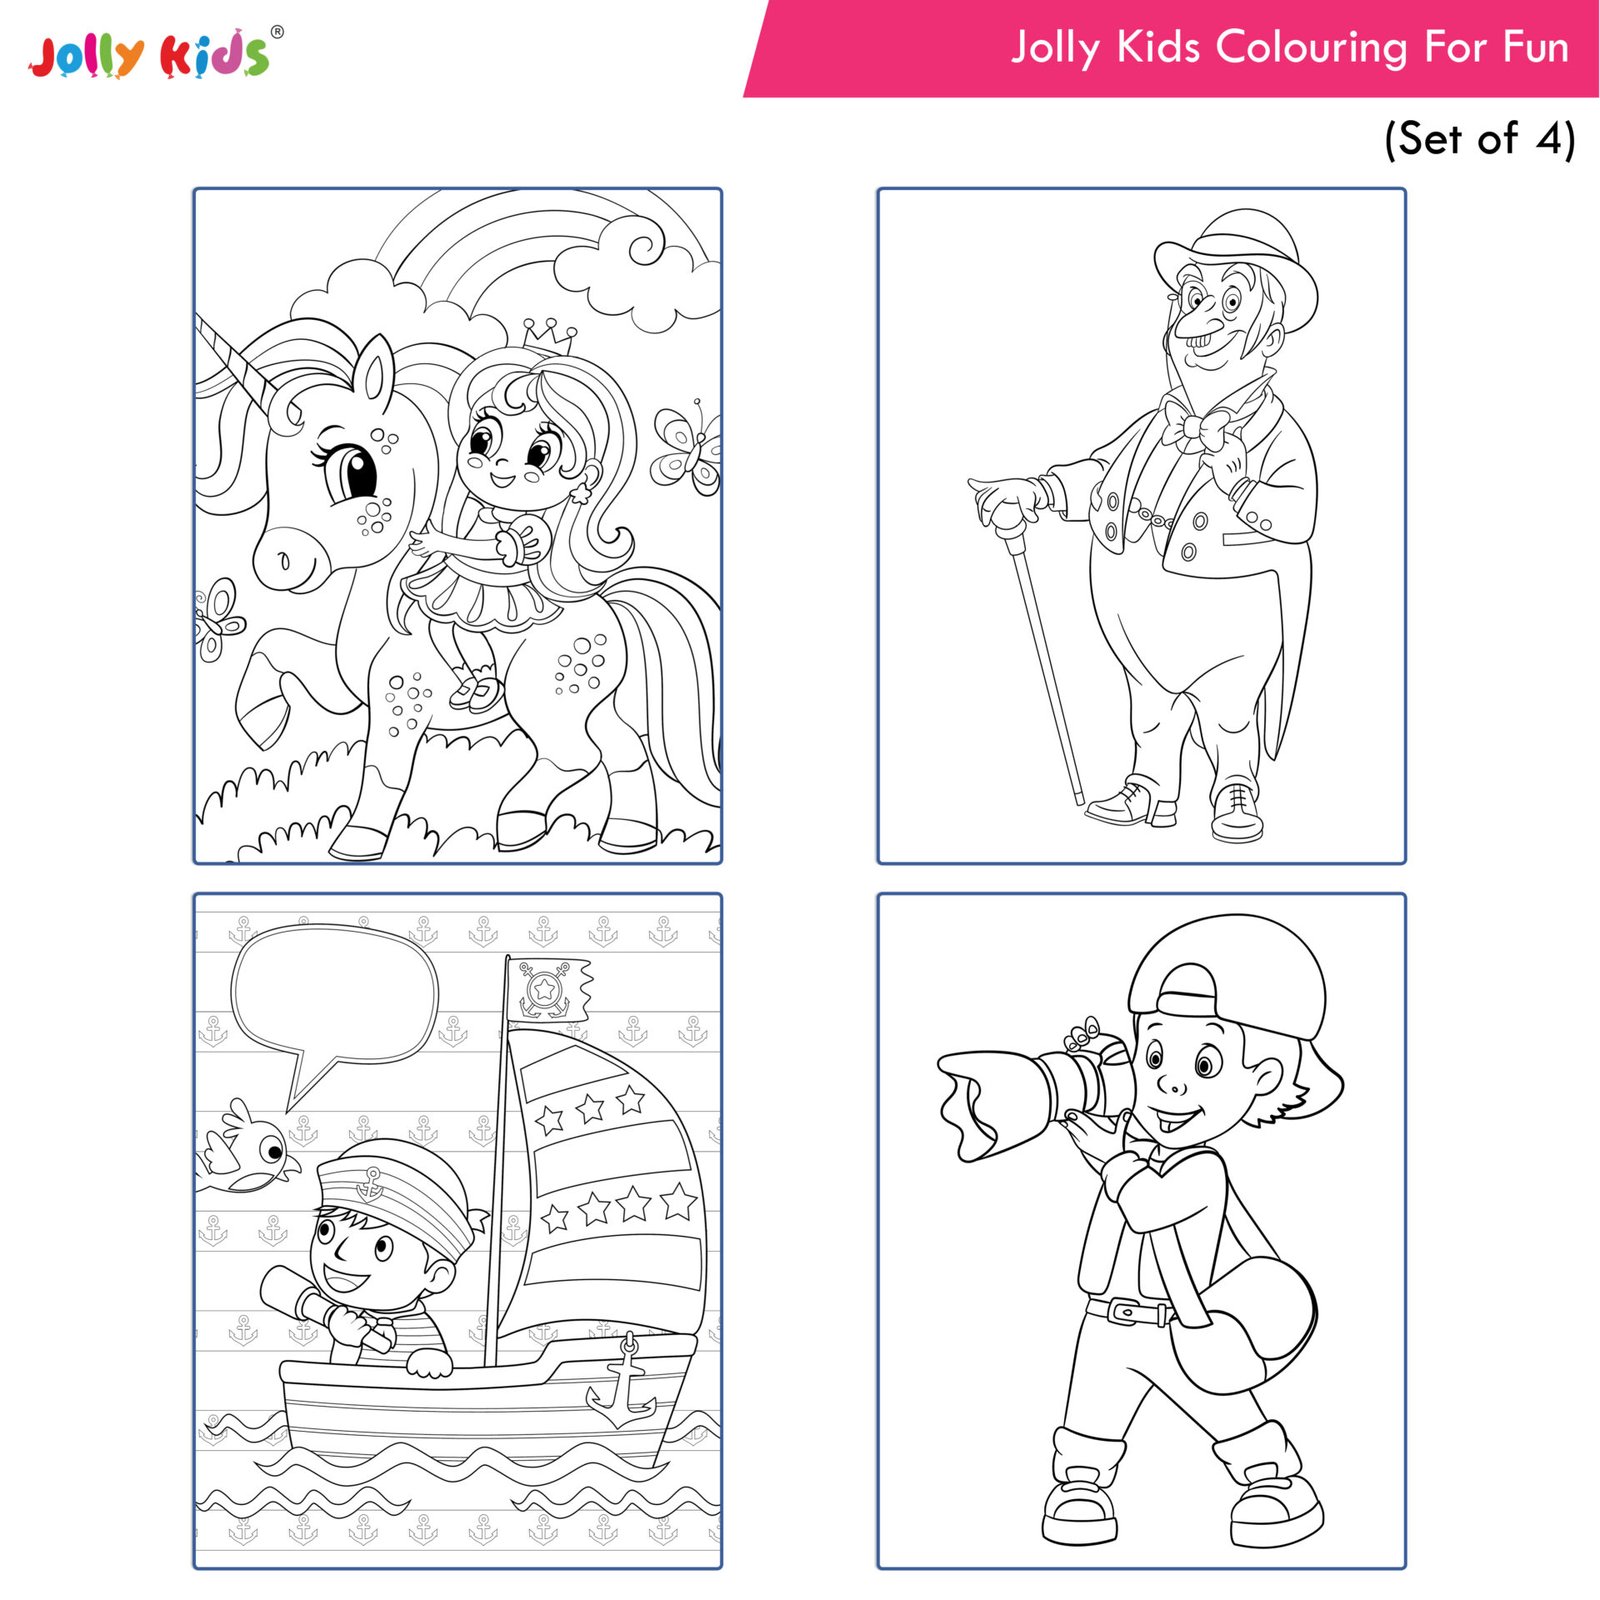 Set Of 8 Colouring And Activity Books For Kids In English